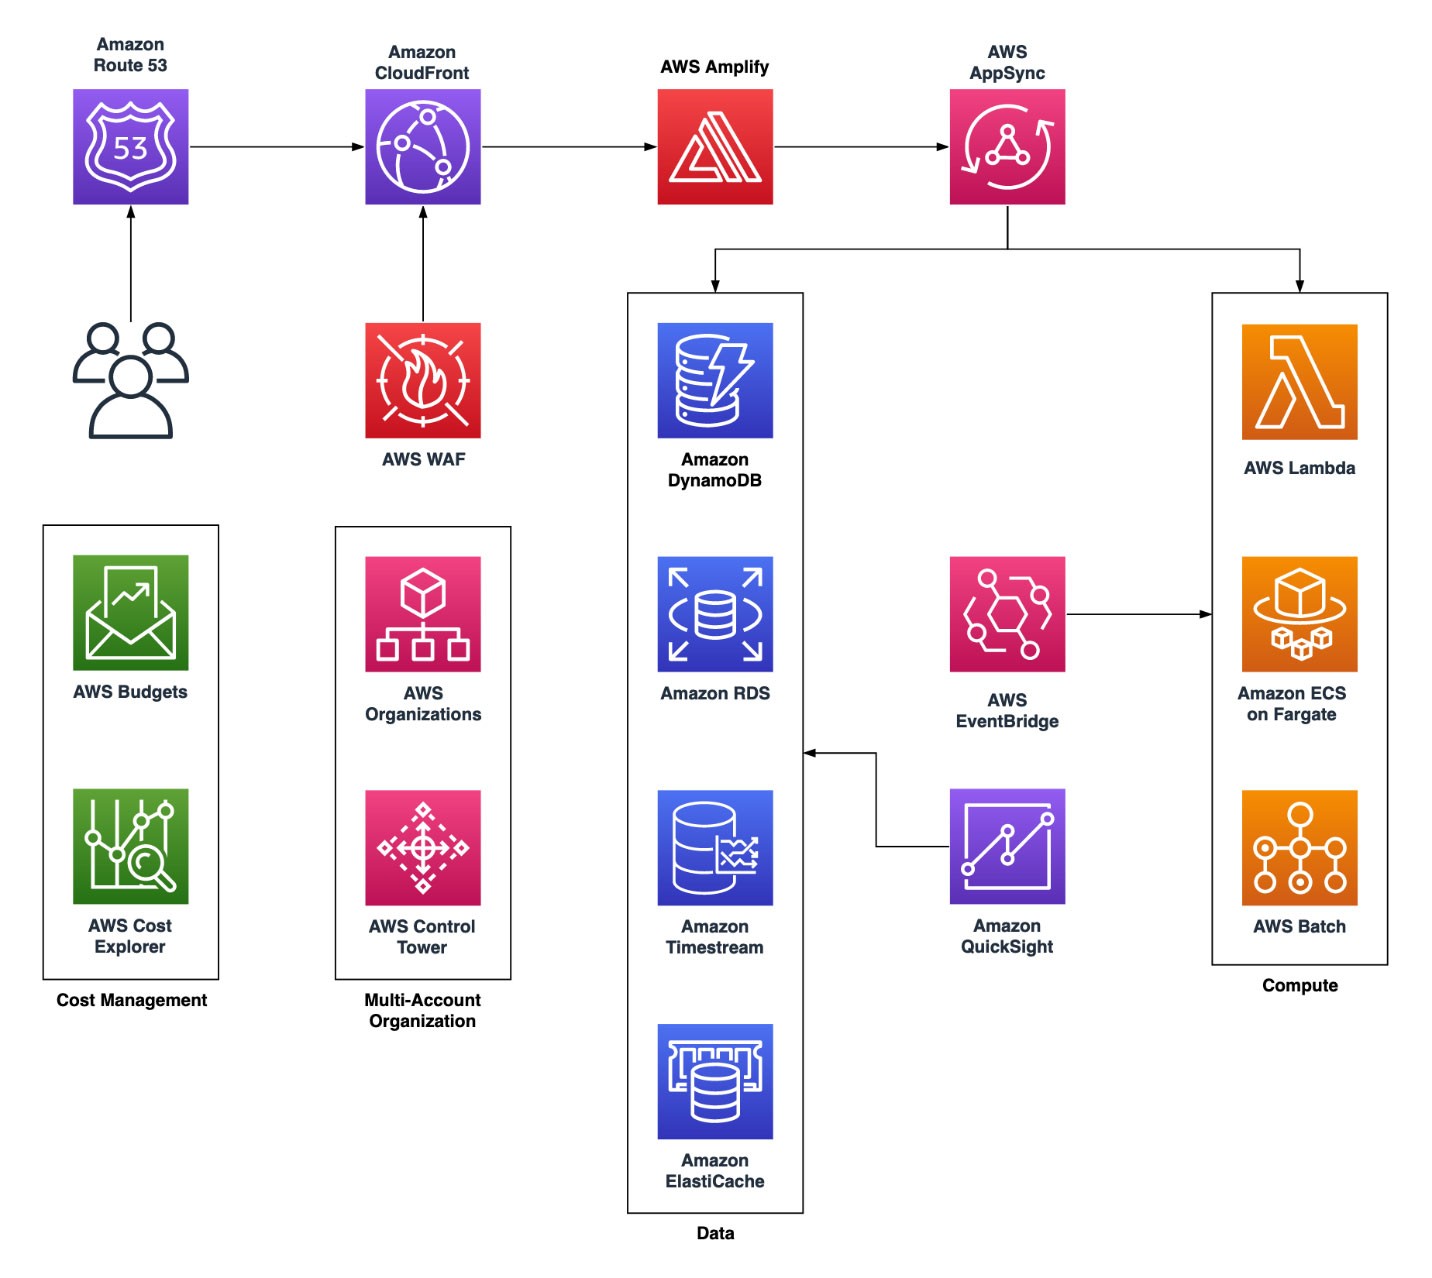 The updated AWS architecture diagram for Example Startup